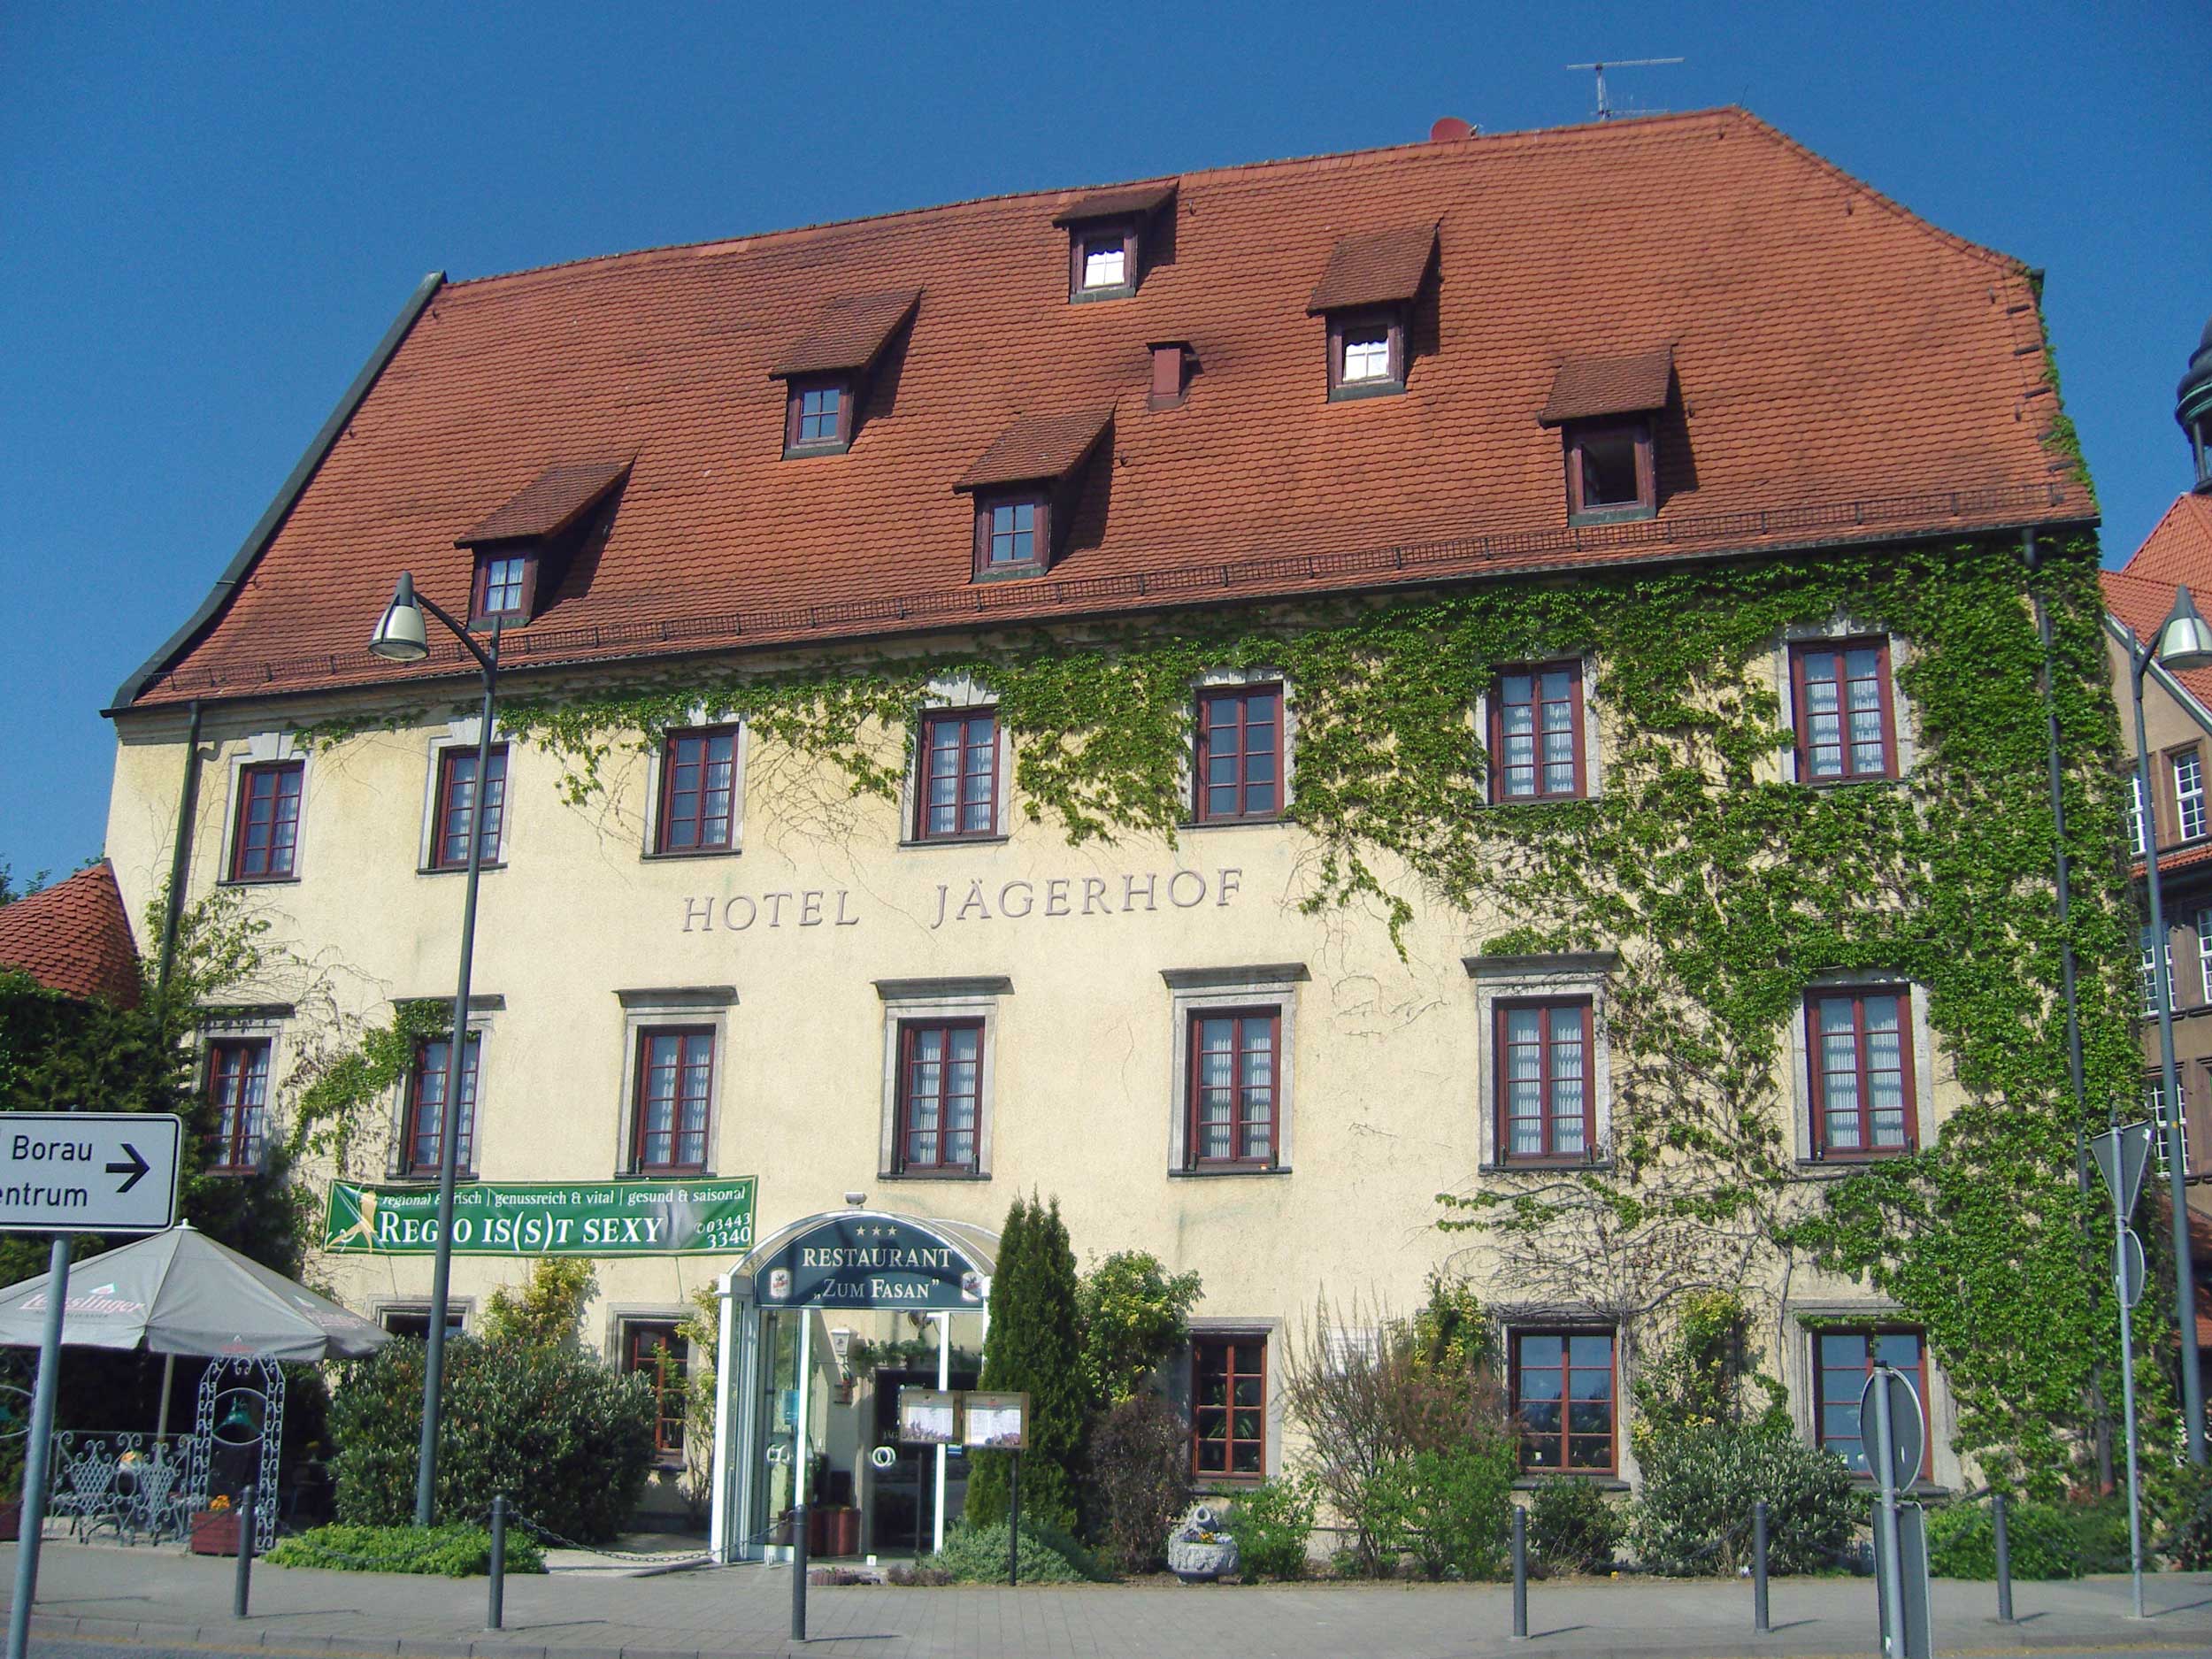 Hotel Jaegerhof in Weissenfels originally was the hunting lodge of the Dukes of Saxe-Weissenfels, and the location for the first performance of Was mir behagt, ist nur die muntre Jagd!, BWV 208 in 1713.